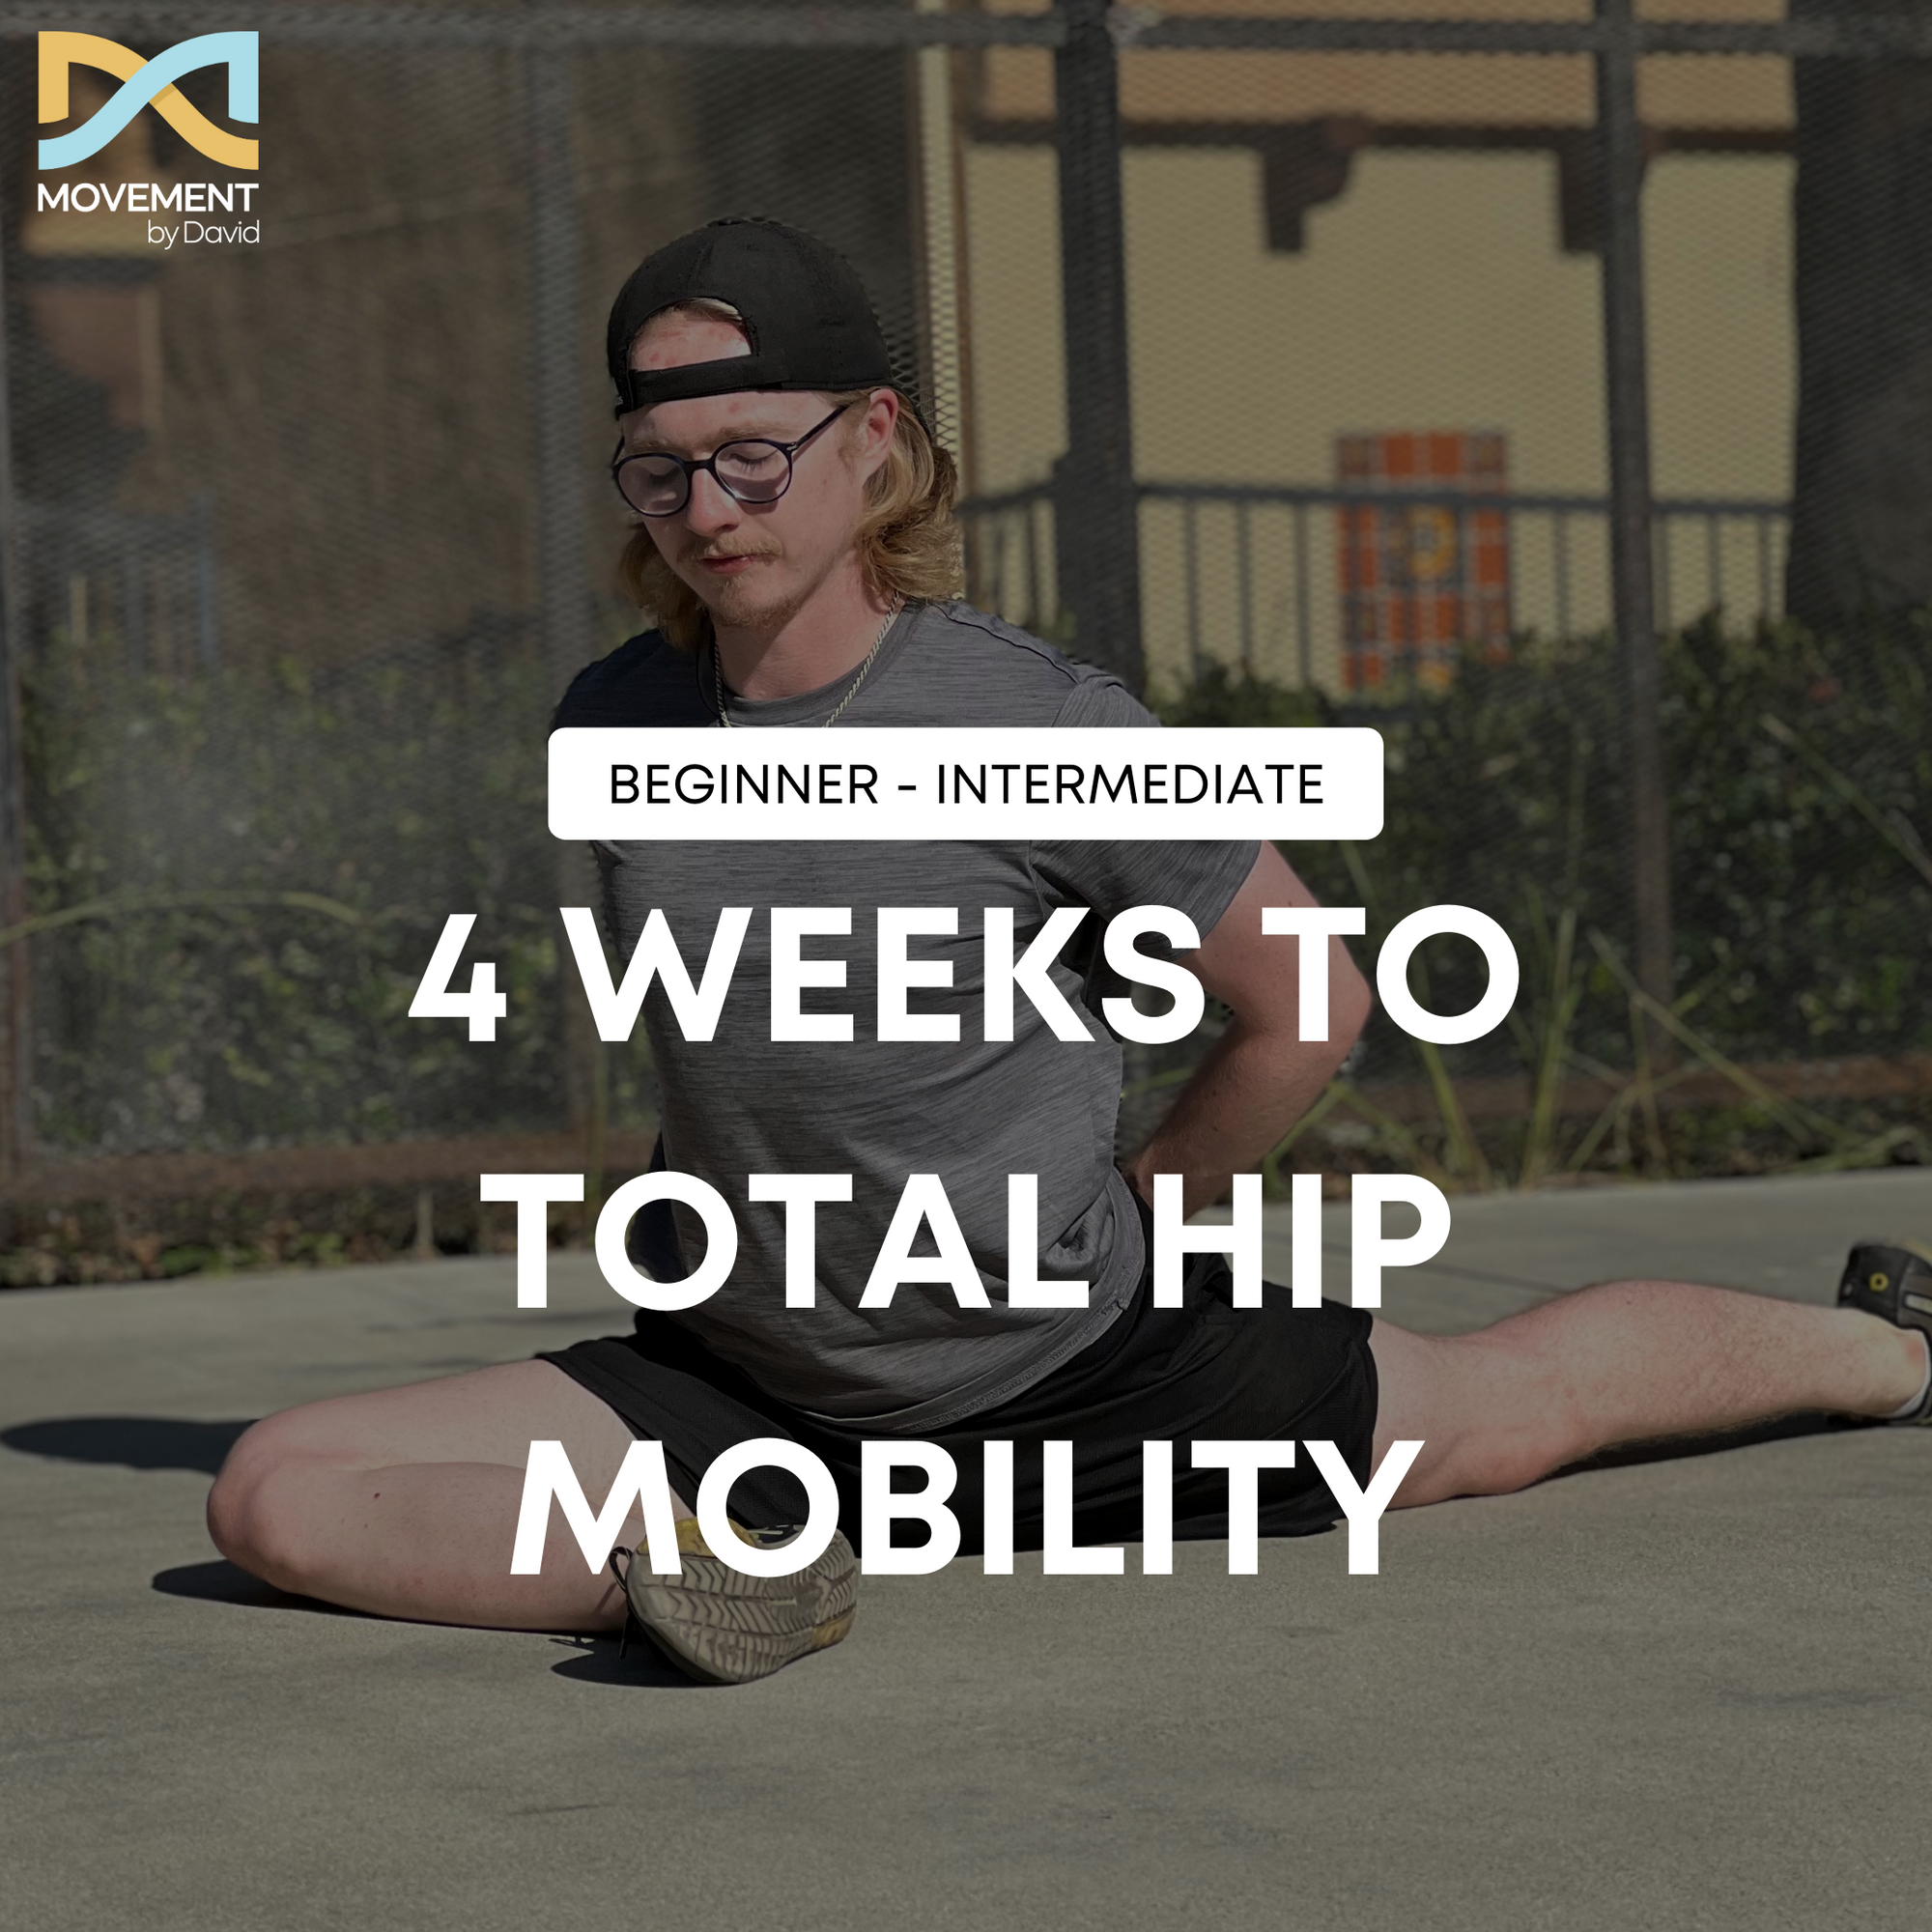 MBD Total Hip Mobility